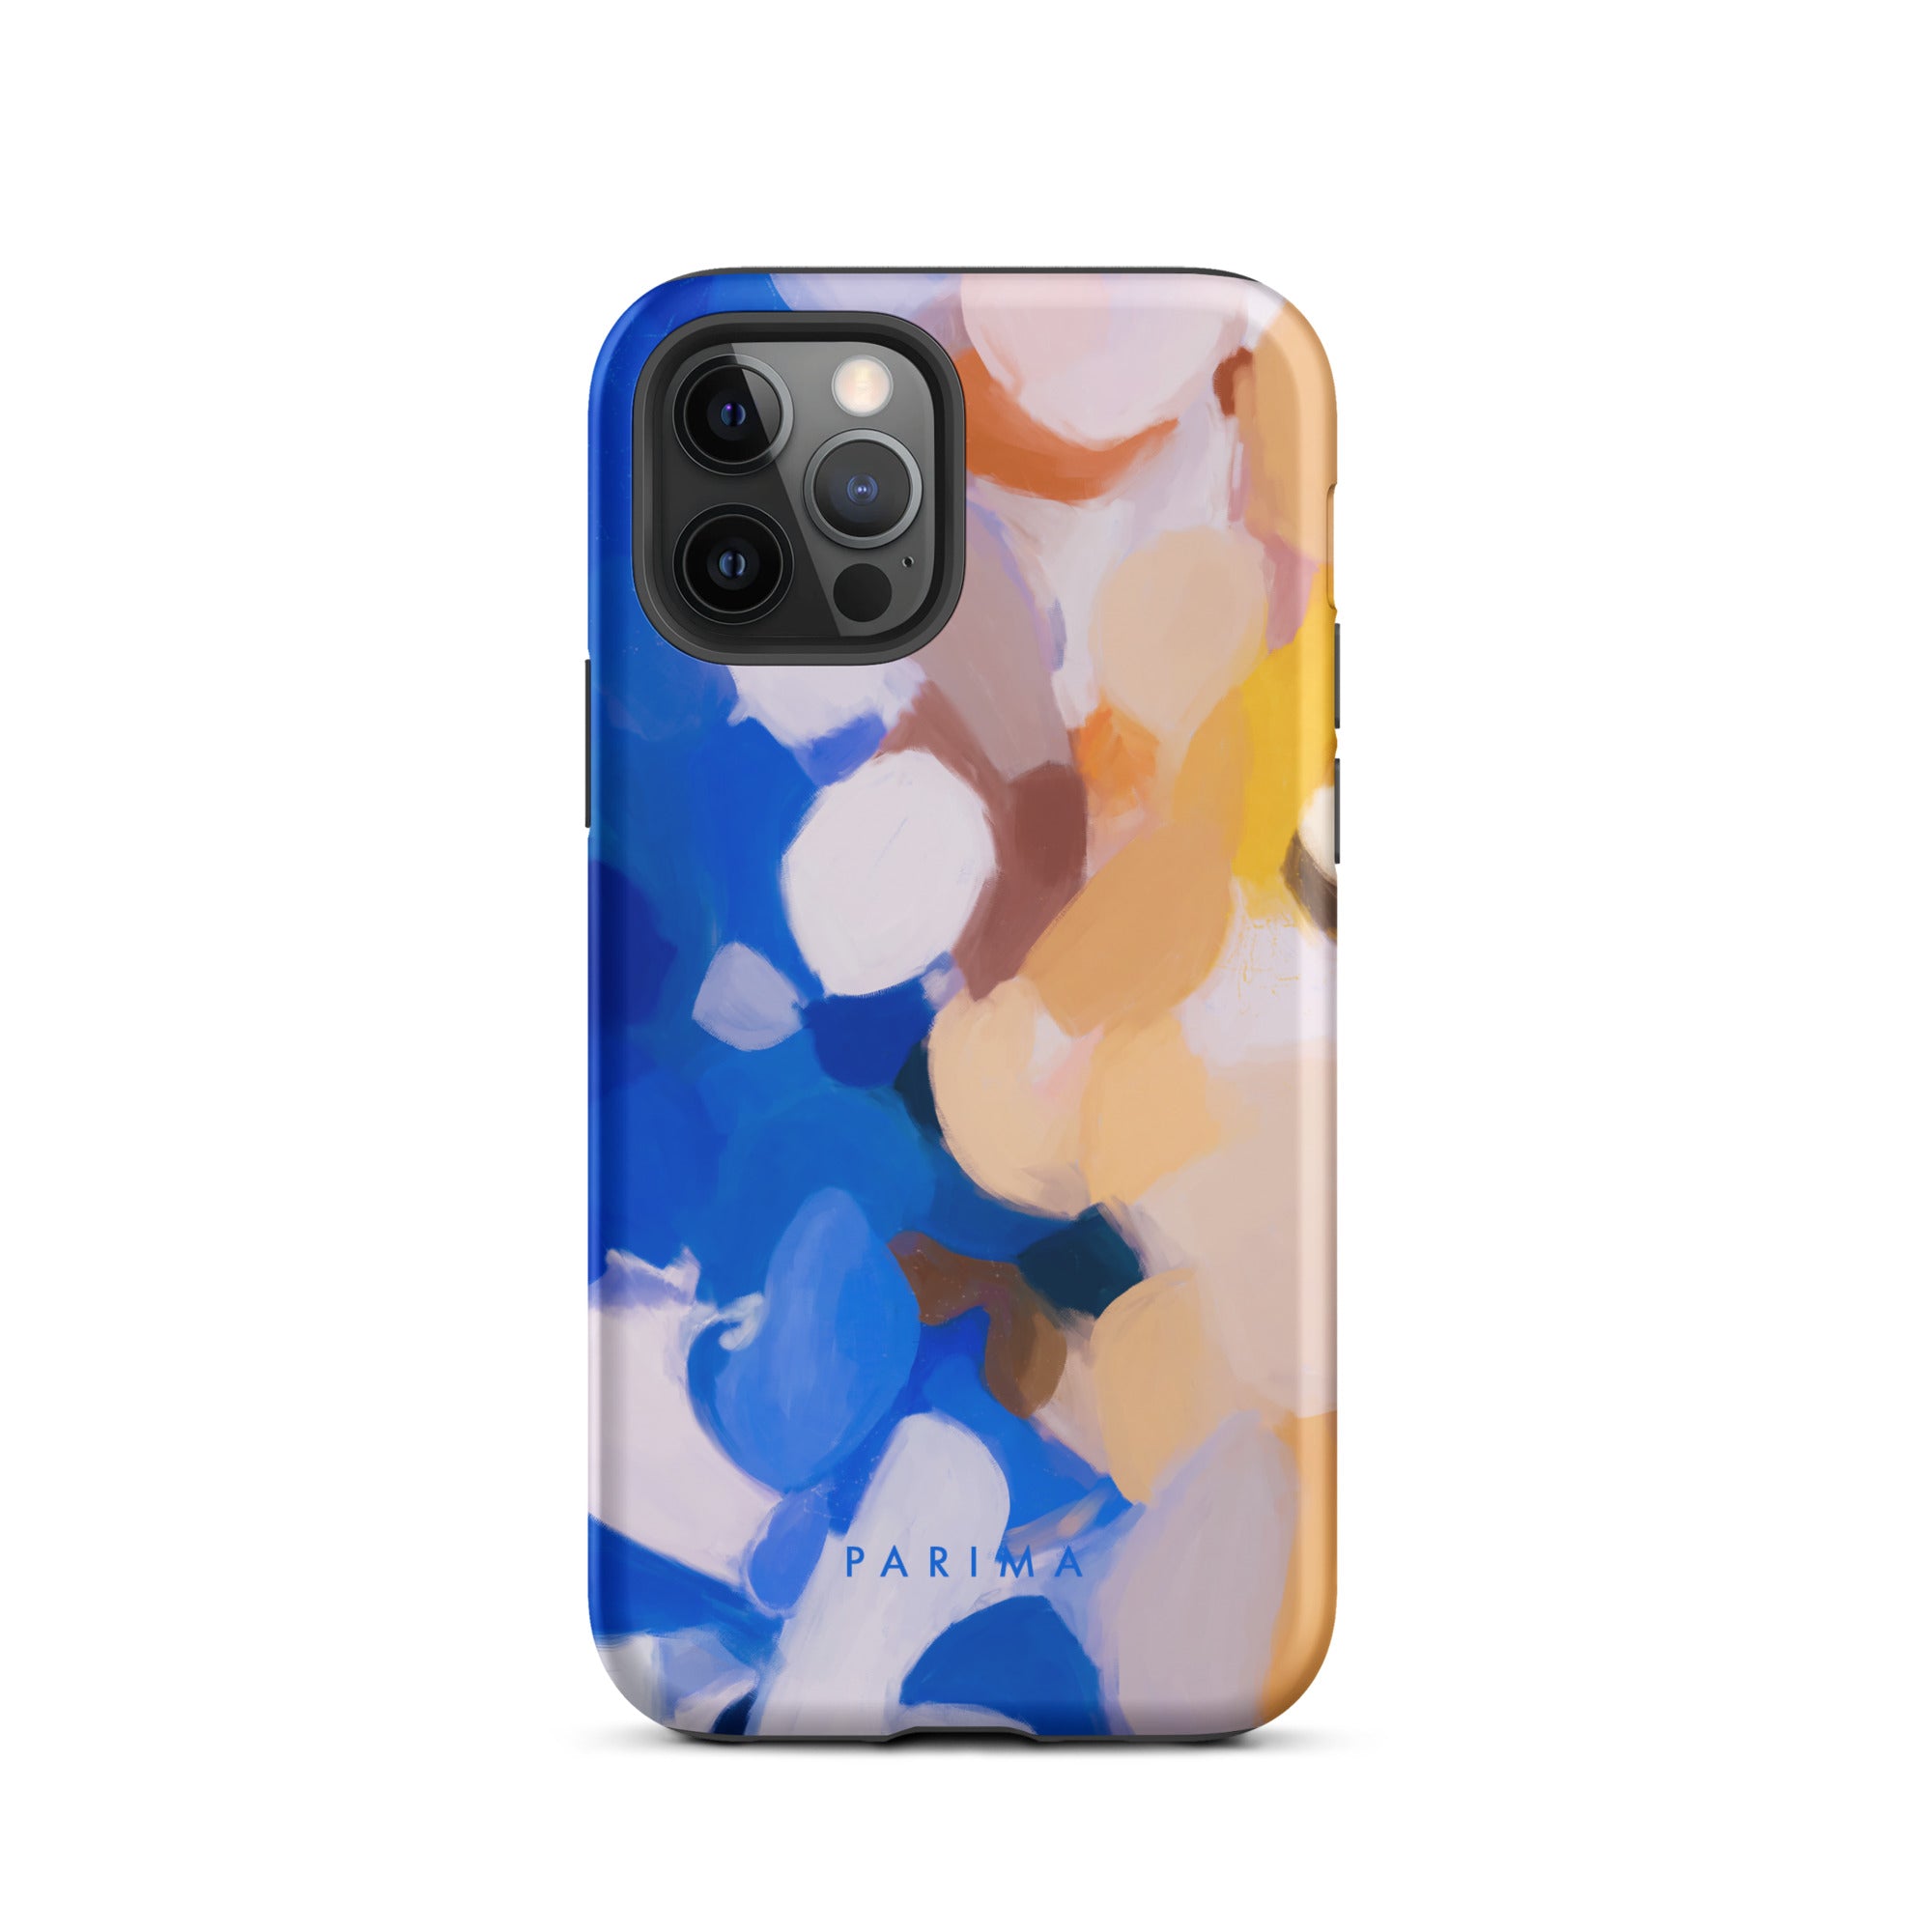 Bluebell, blue and yellow abstract art - iPhone 12 Pro tough case by Parima Studio